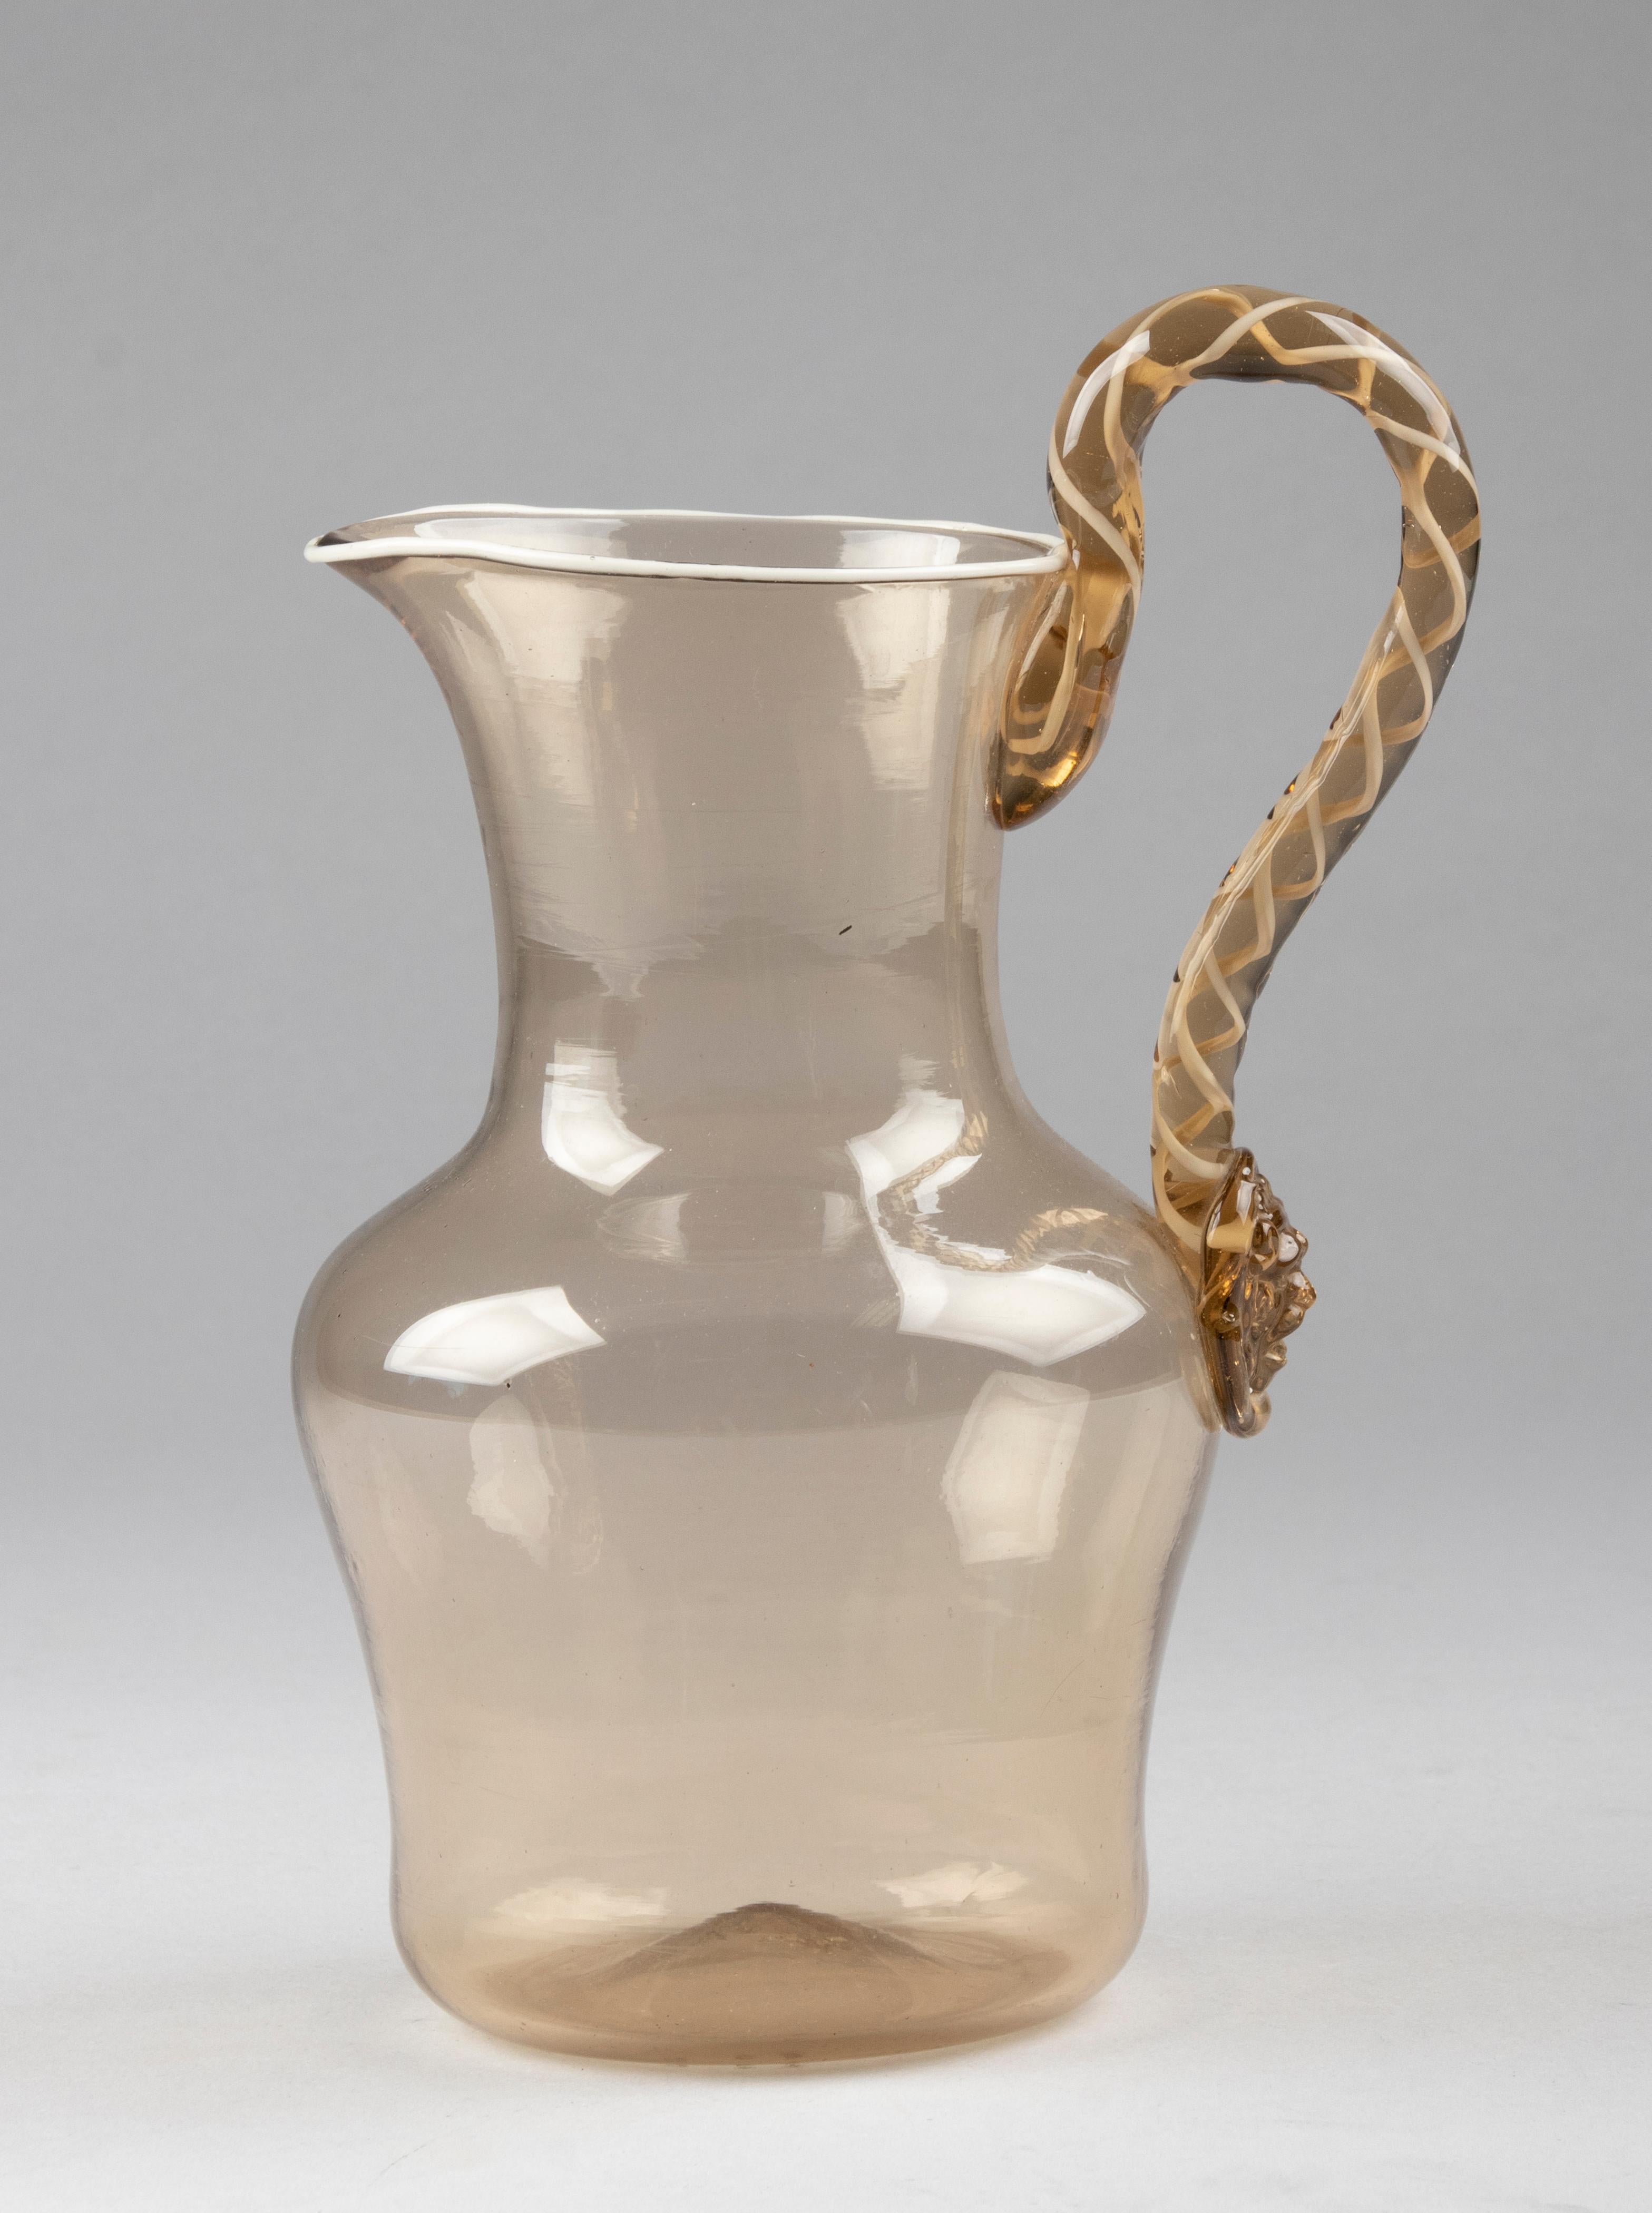 Beautiful Murano glass water jug. Large model. Made of smoke colored glass, with fine accents of white lines. The handle is nicely decorated with a swirl. In good condition.